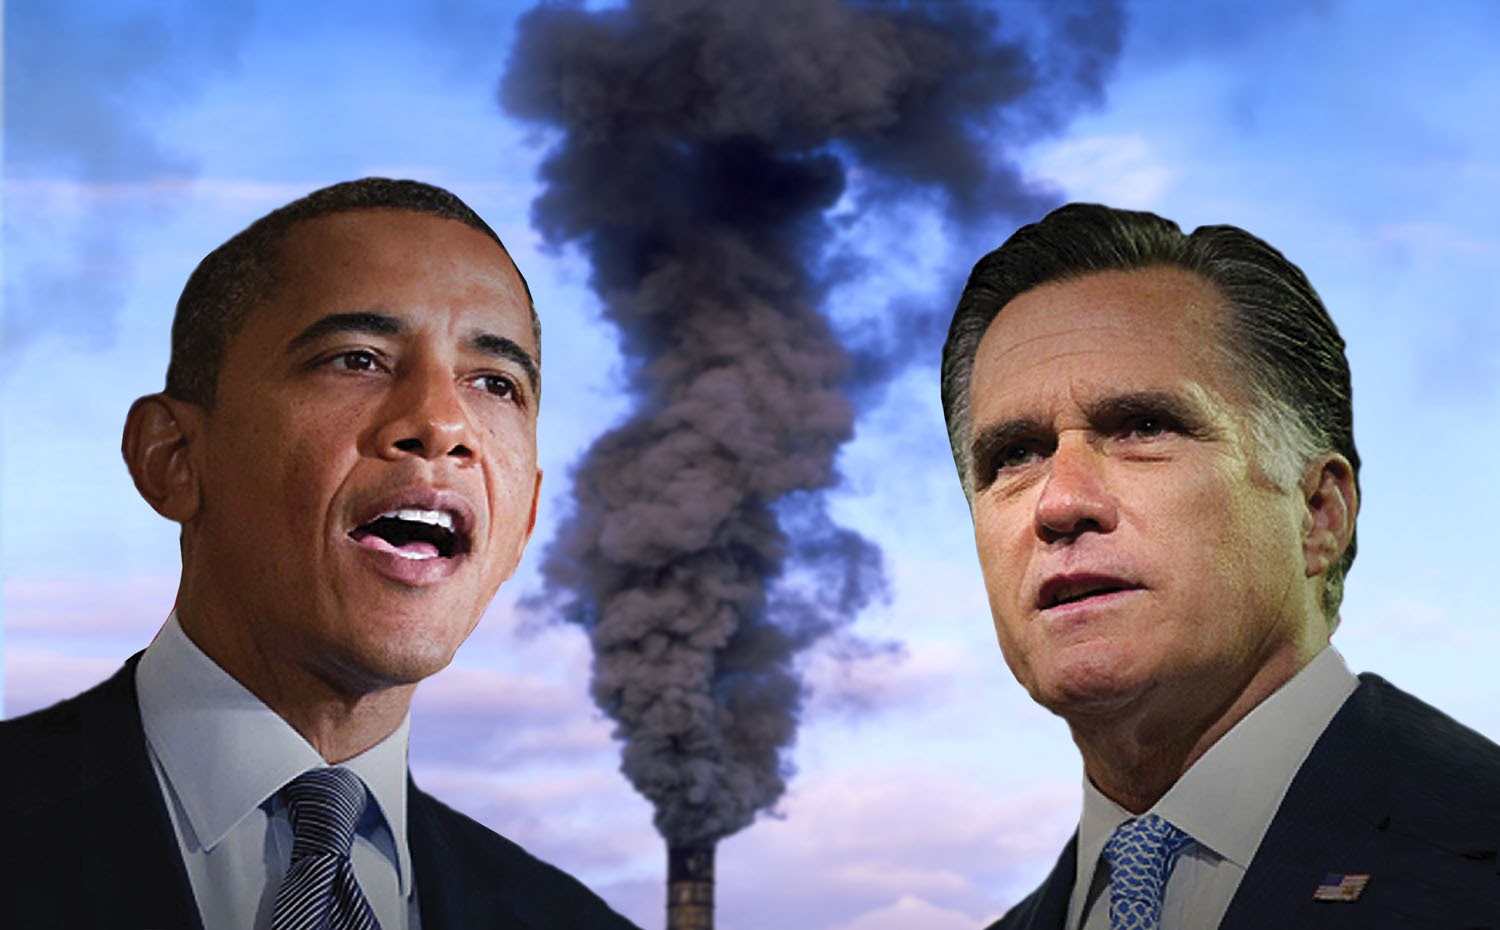 MITT ROMNEY CONCEALED STAKE IN OBAMA ENERGY STIMULUS WHILE ATTACKING IT